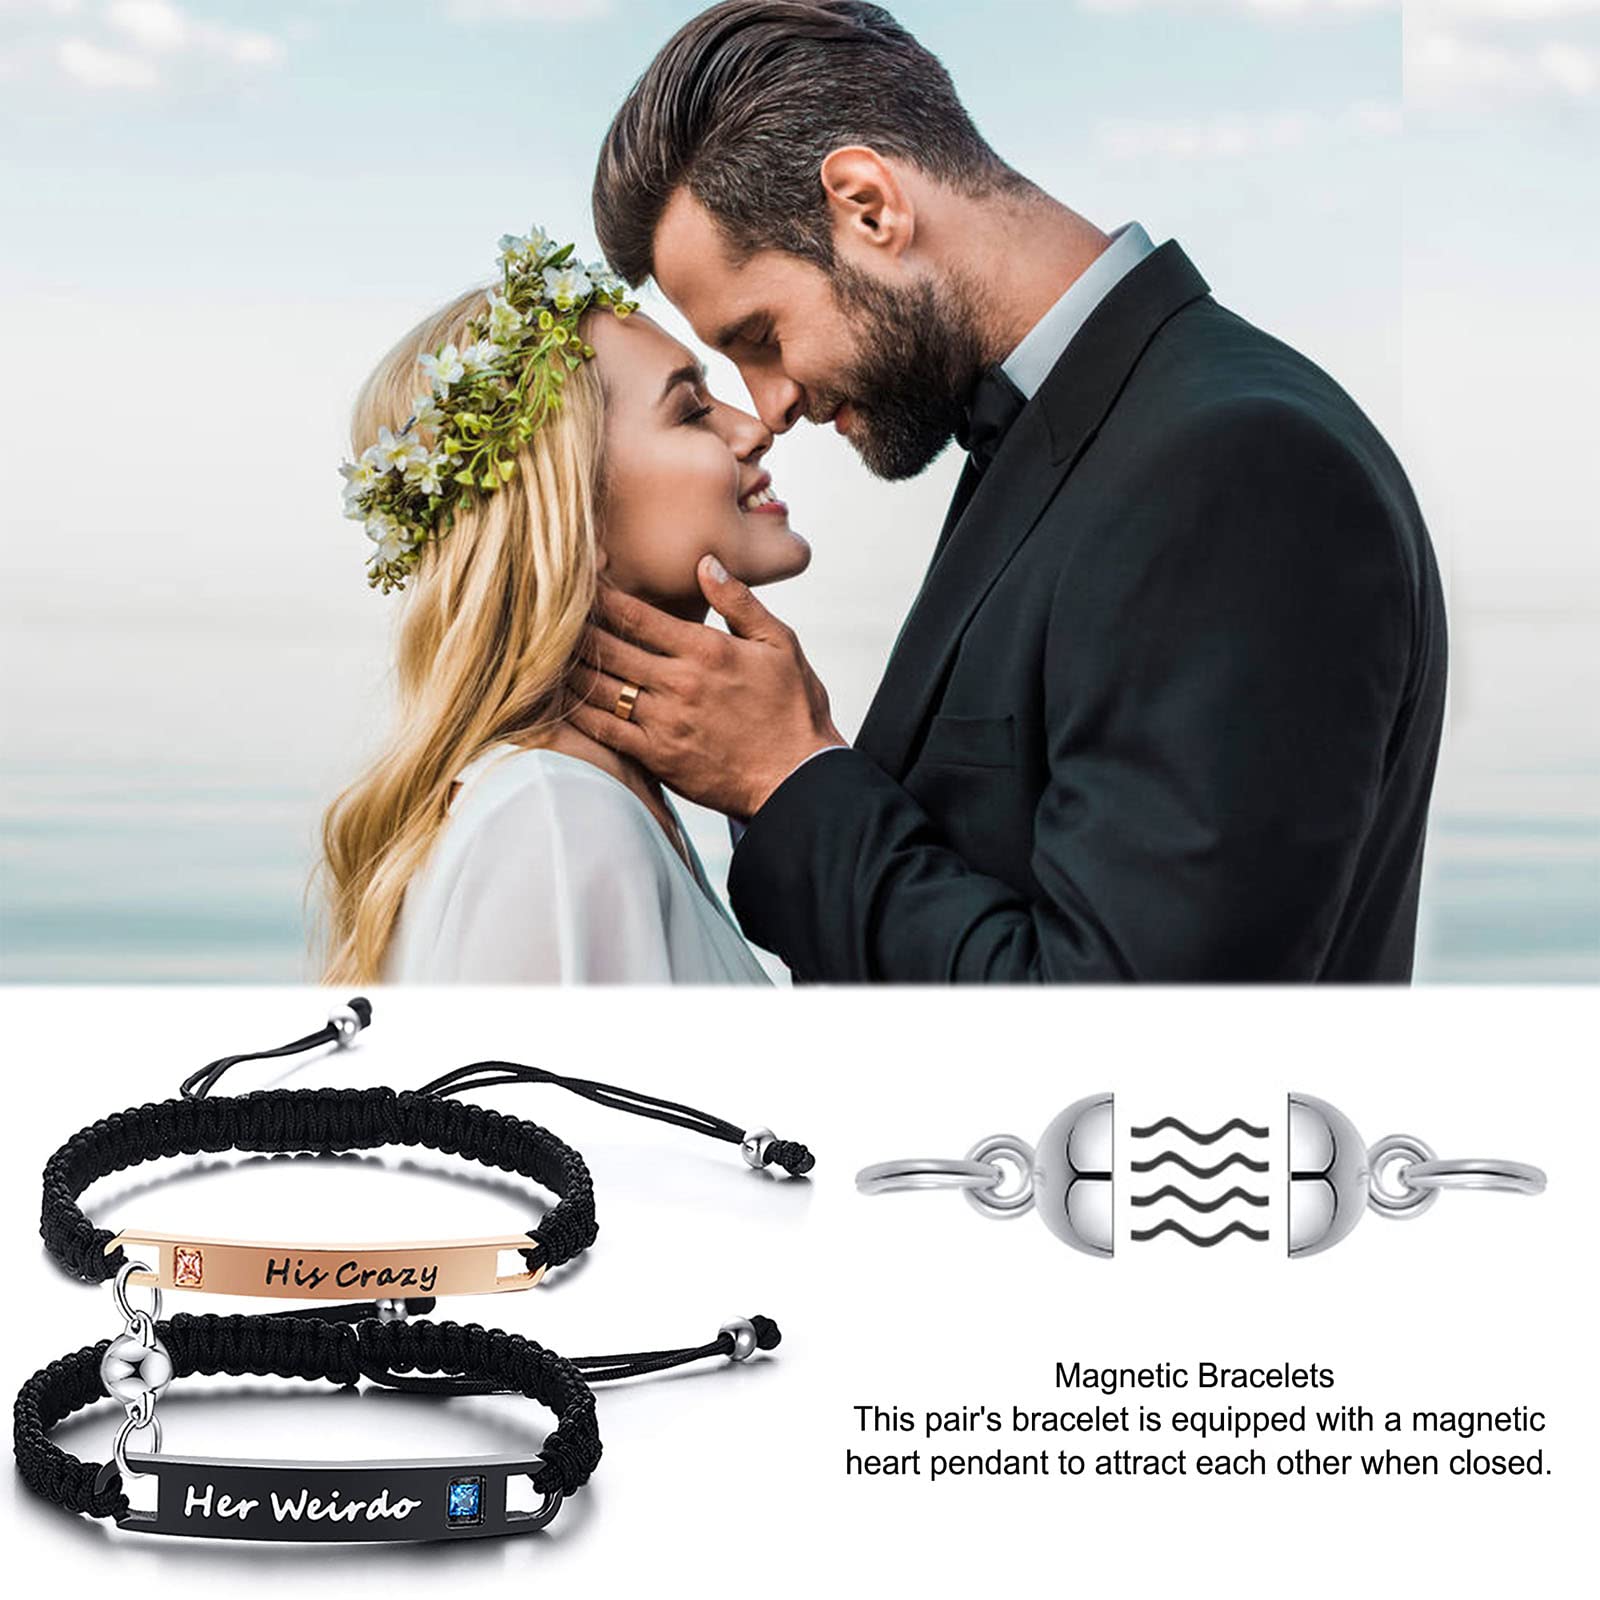 Personalized Custom His and Hers Handmade Rope Braided Nameplate ID Matching Couple Bracelets for Lover (Rosegolden-black-His Crazy & Her Weirdo-ball)